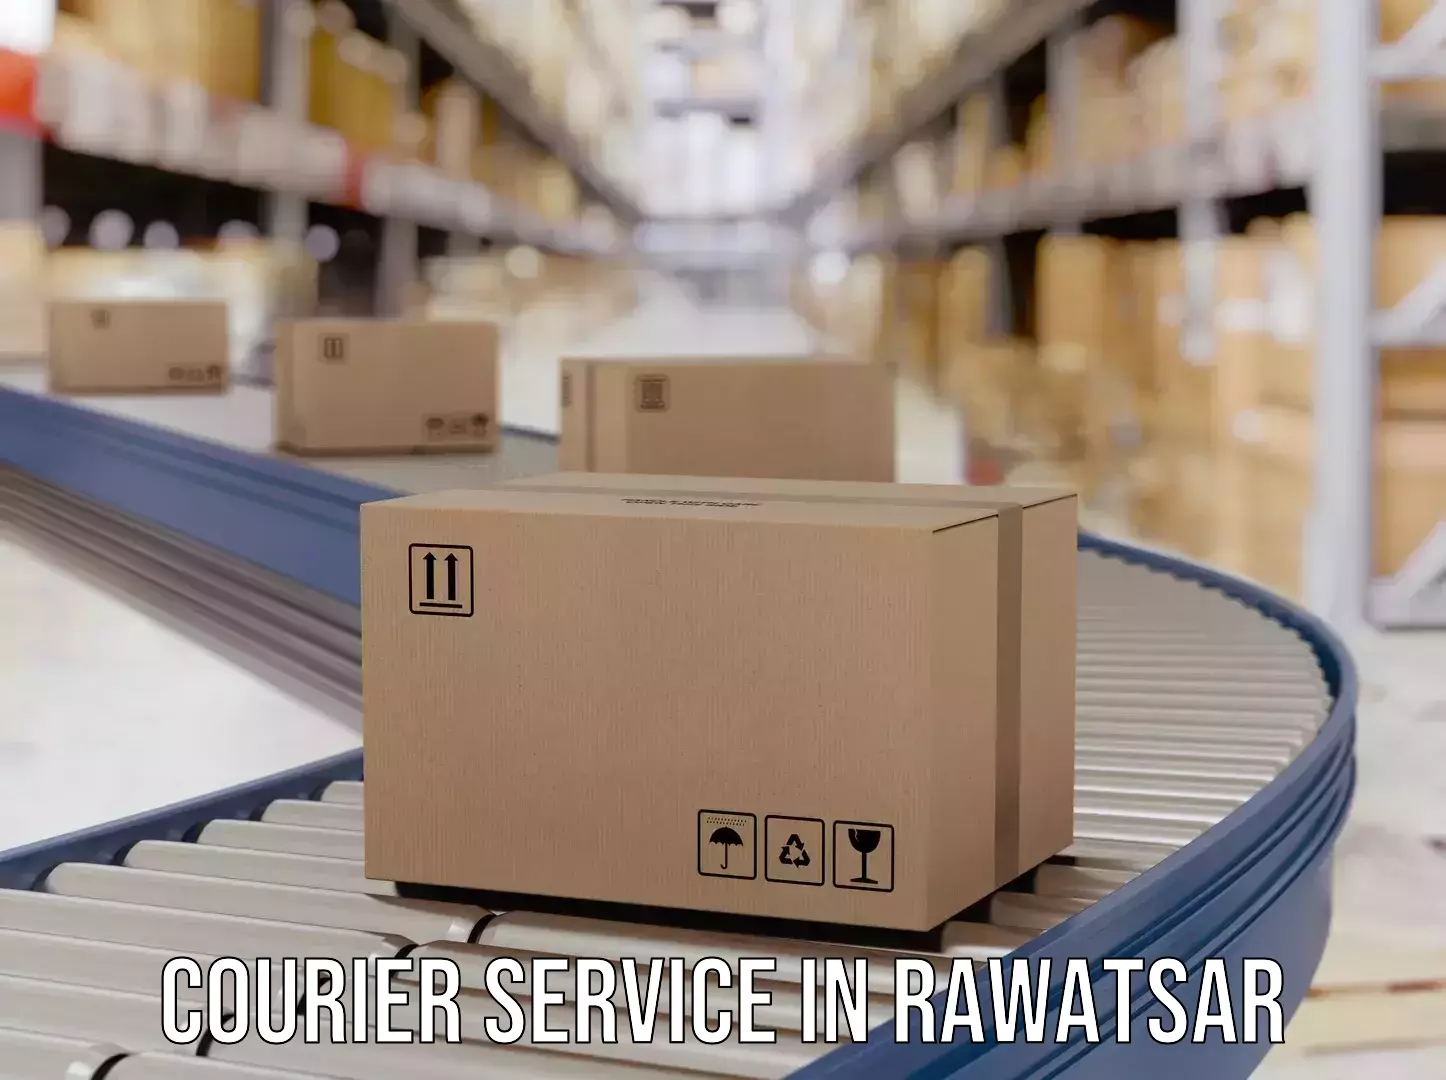 Flexible delivery schedules in Rawatsar